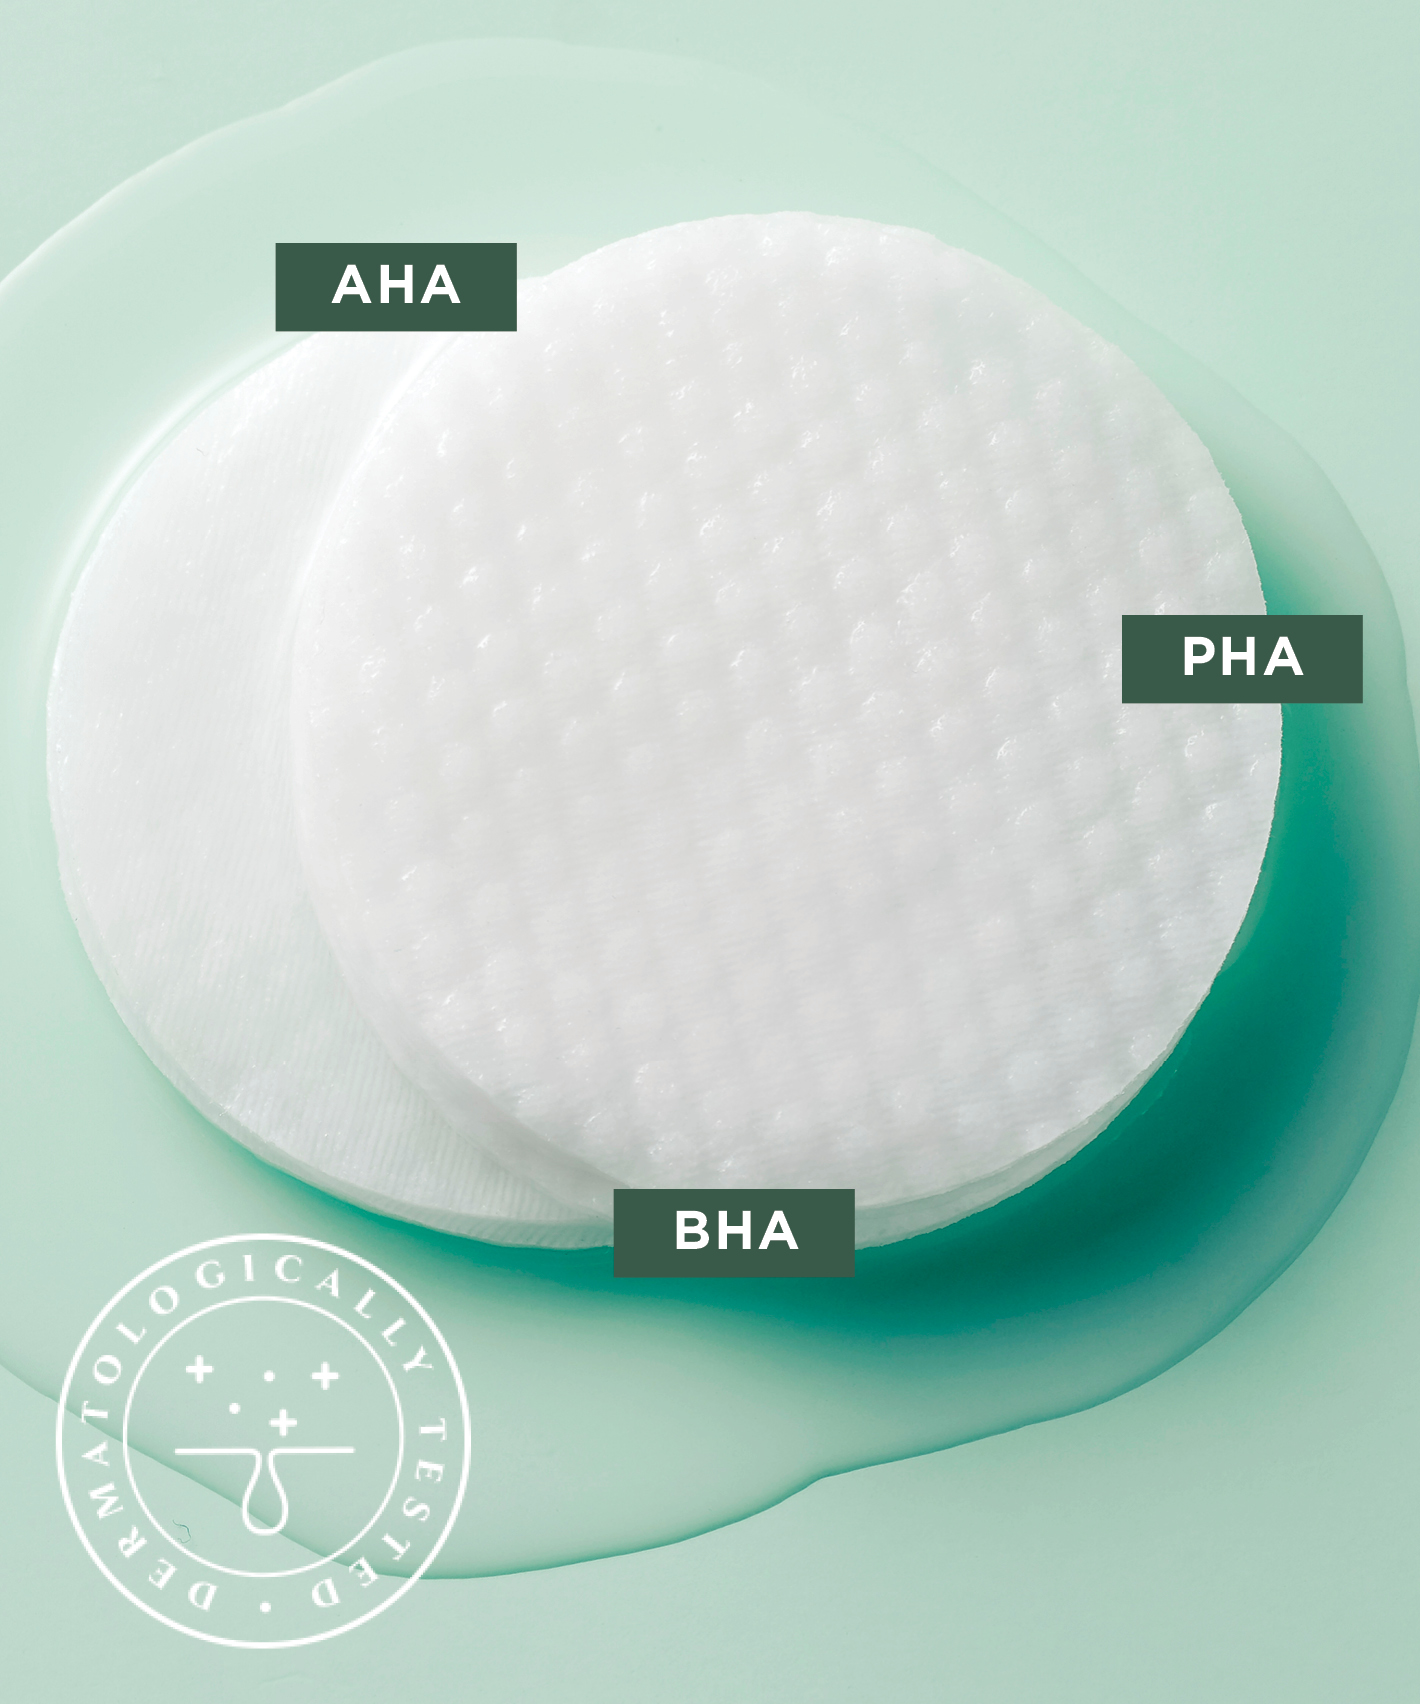 Two The Face Shop Toner Pads lying in a tiny puddle of liquid on a light green surface. Three abbreviations are attached to the image: AHA, PHA, BHA and also a stamp saying "Dermatologically Tested"